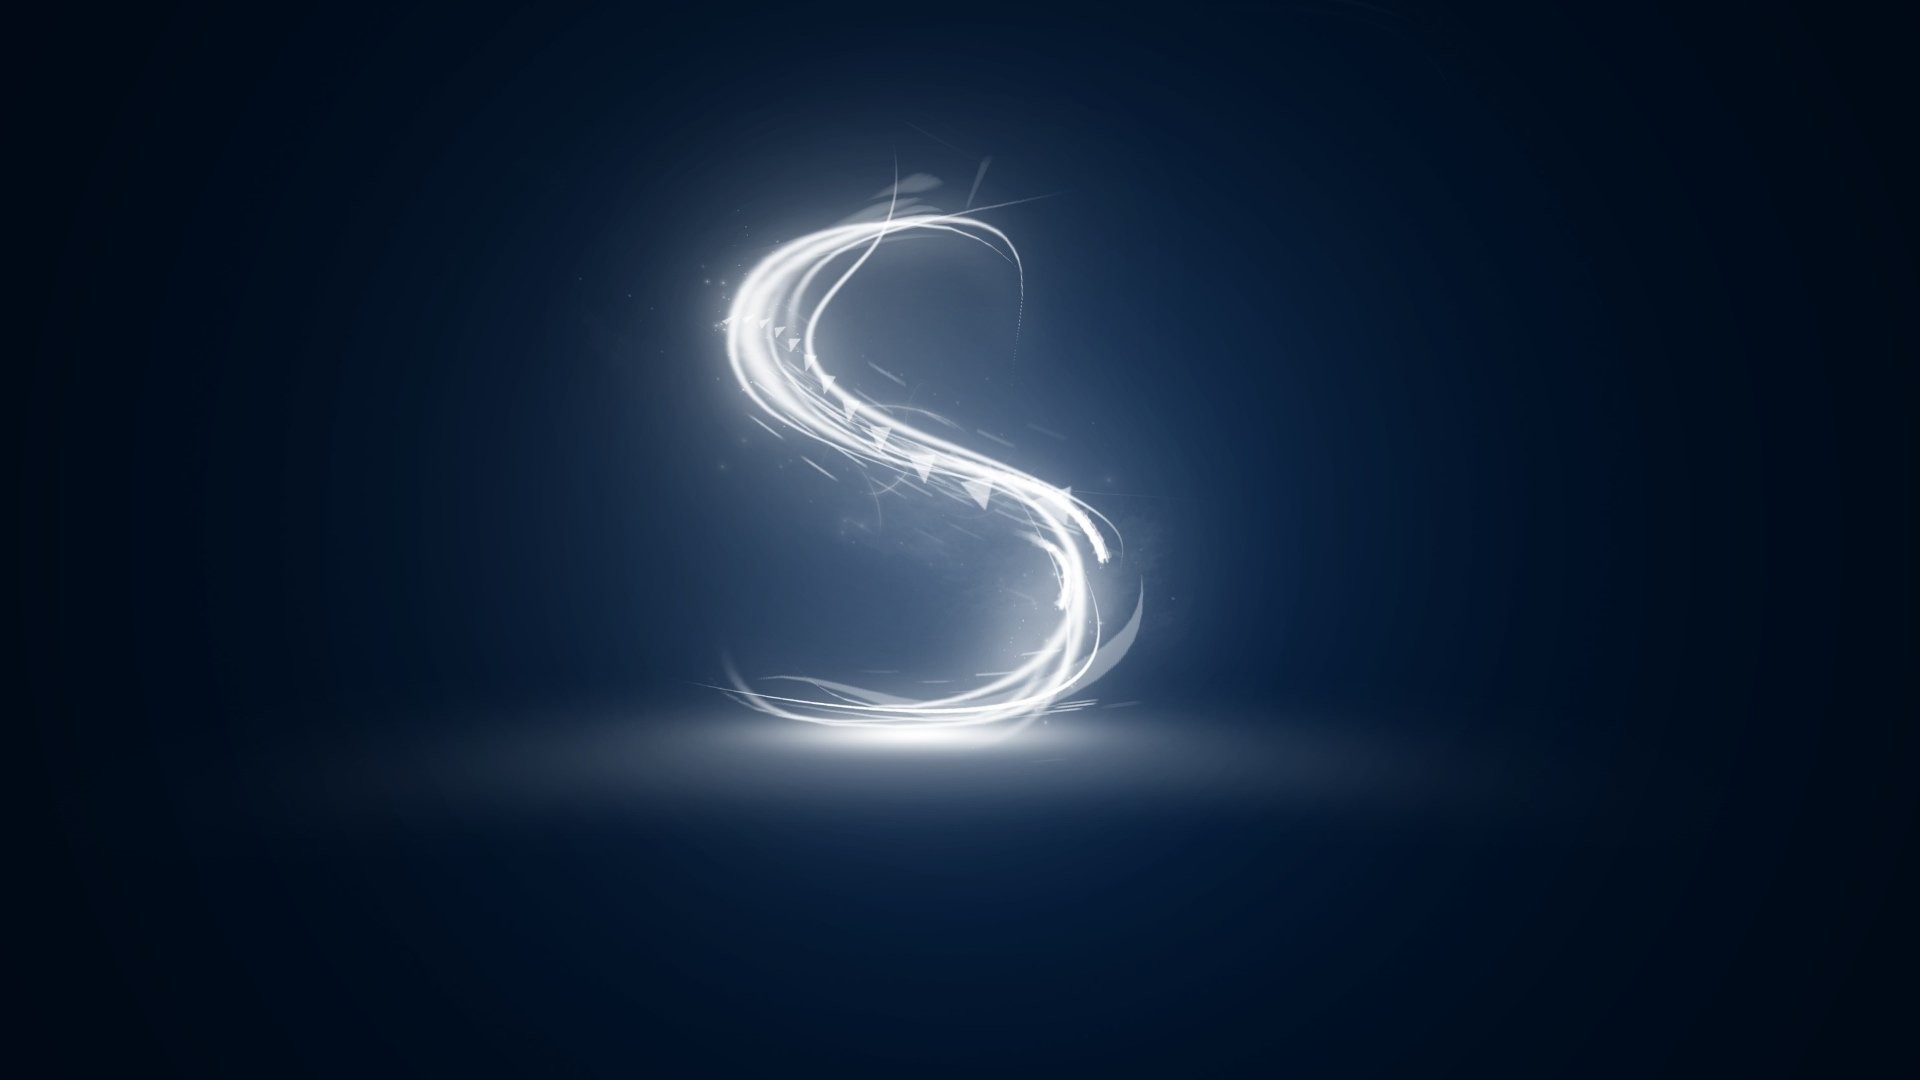 Letter S Wallpapers For Mobile HD Wallpapers Download Free Images Wallpaper [wallpaper981.blogspot.com]